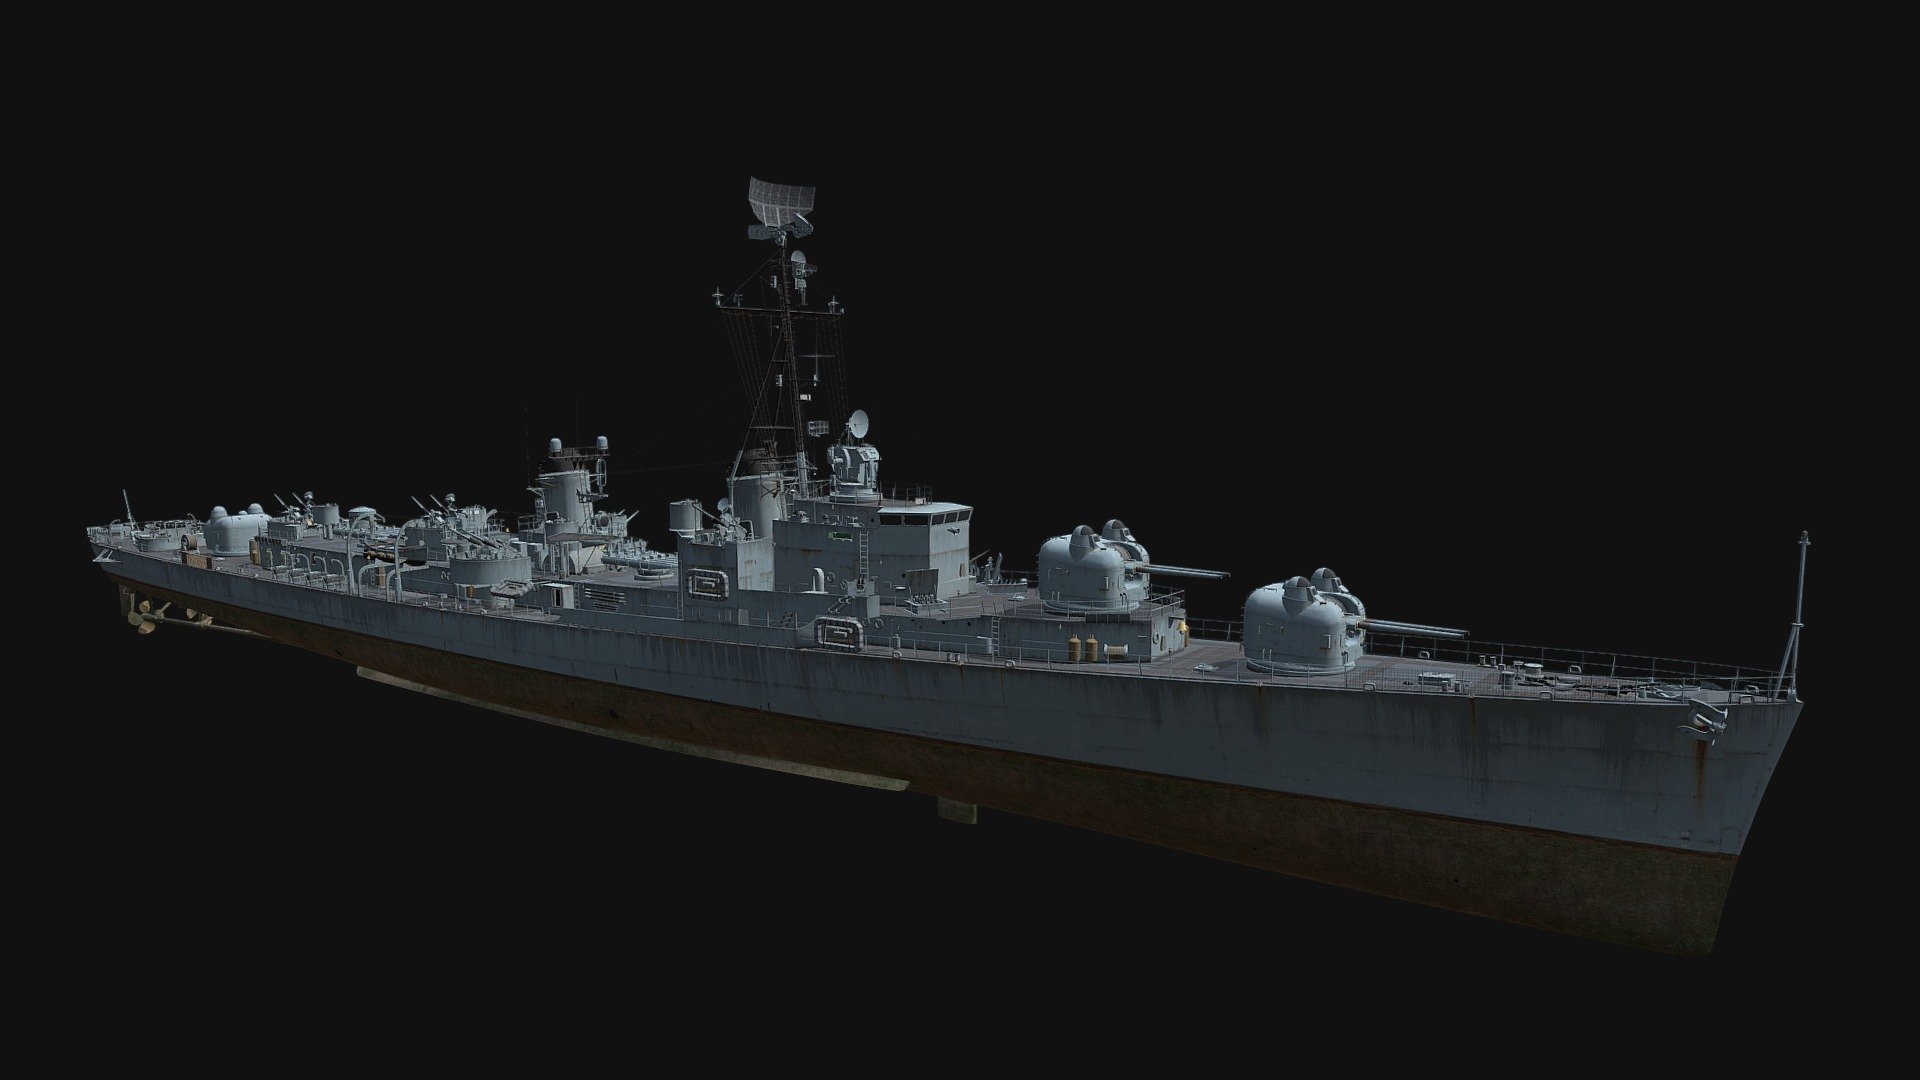 This model was developed by Wargaming for their popular game ‘World of Warships’. Play World of Warships now to send these ships into battle!

Use the following link to start playing!

https://worldofwarships.com/

Joshua Humphreys — American Tier ★ destroyer.

An air-defense destroyer similar in architecture to the Gearing-class ships. The destroyer's main armament comprises 10 torpedo tubes and powerful 127 mm dual-purpose mounts of a post-war design 3d model